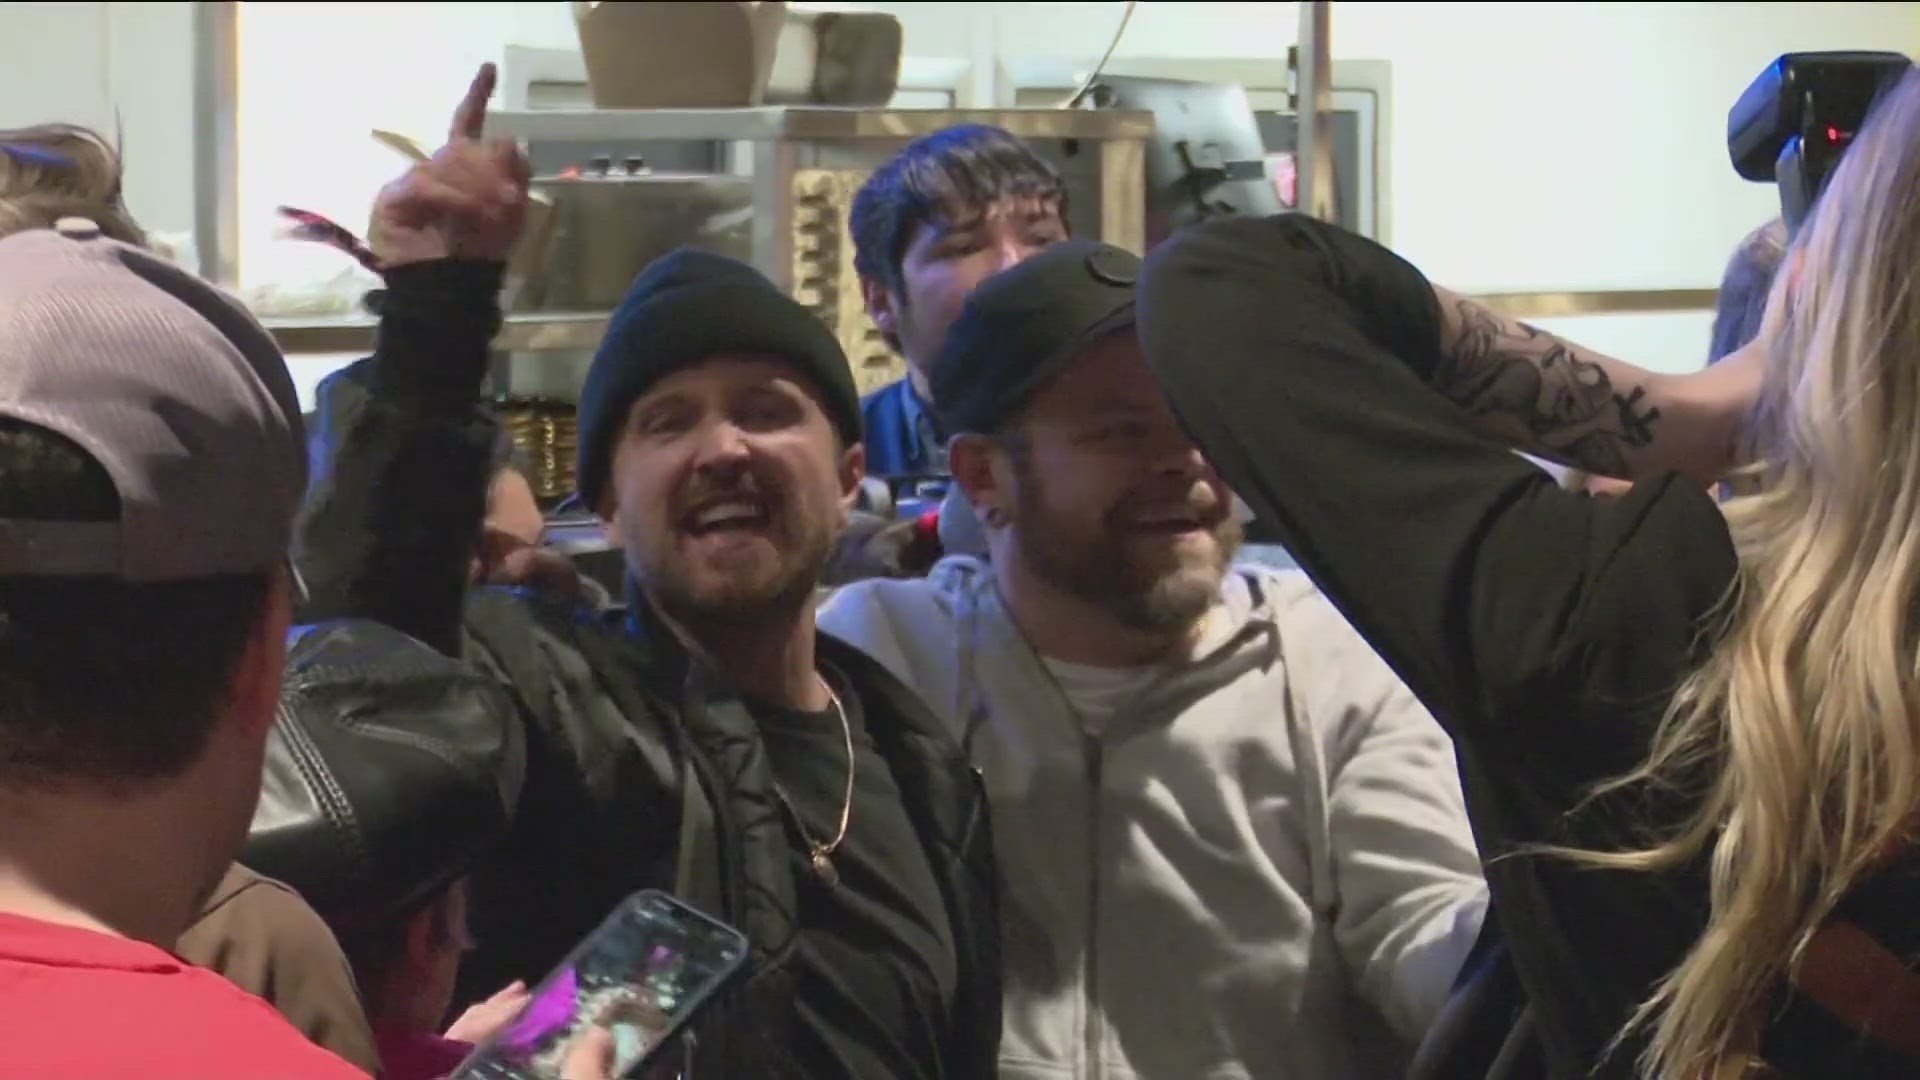 Aaron Paul and Bryan Cranston came to Boise this weekend to promote their Mezcal liquor Dos Hombres, while making multiple stops throughout town.